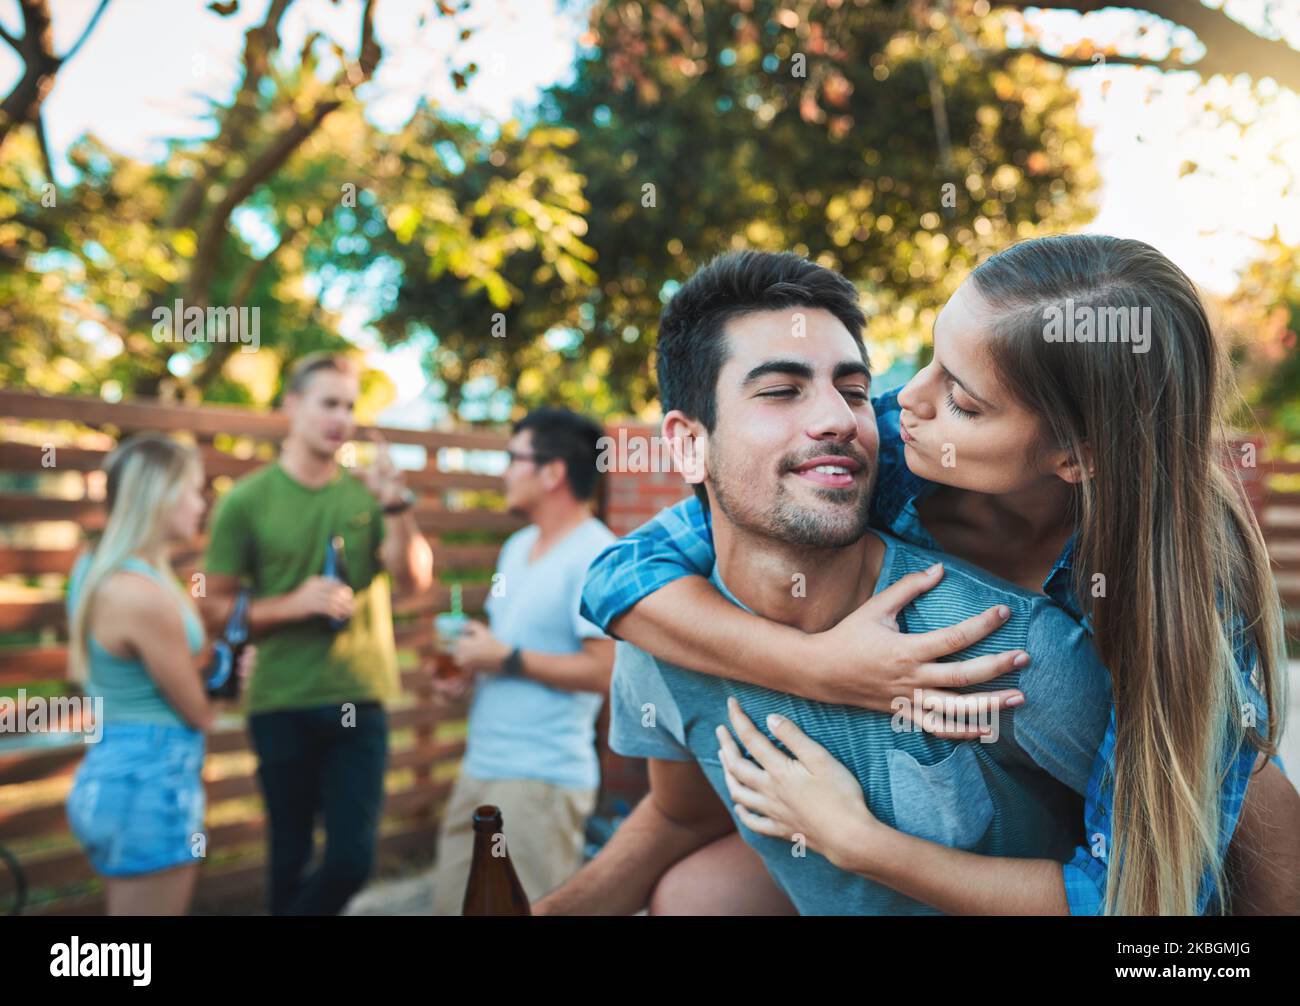 Love puts the we in weekend. a young couple enjoying a piggyback ride while hanging out with their friends. Stock Photo